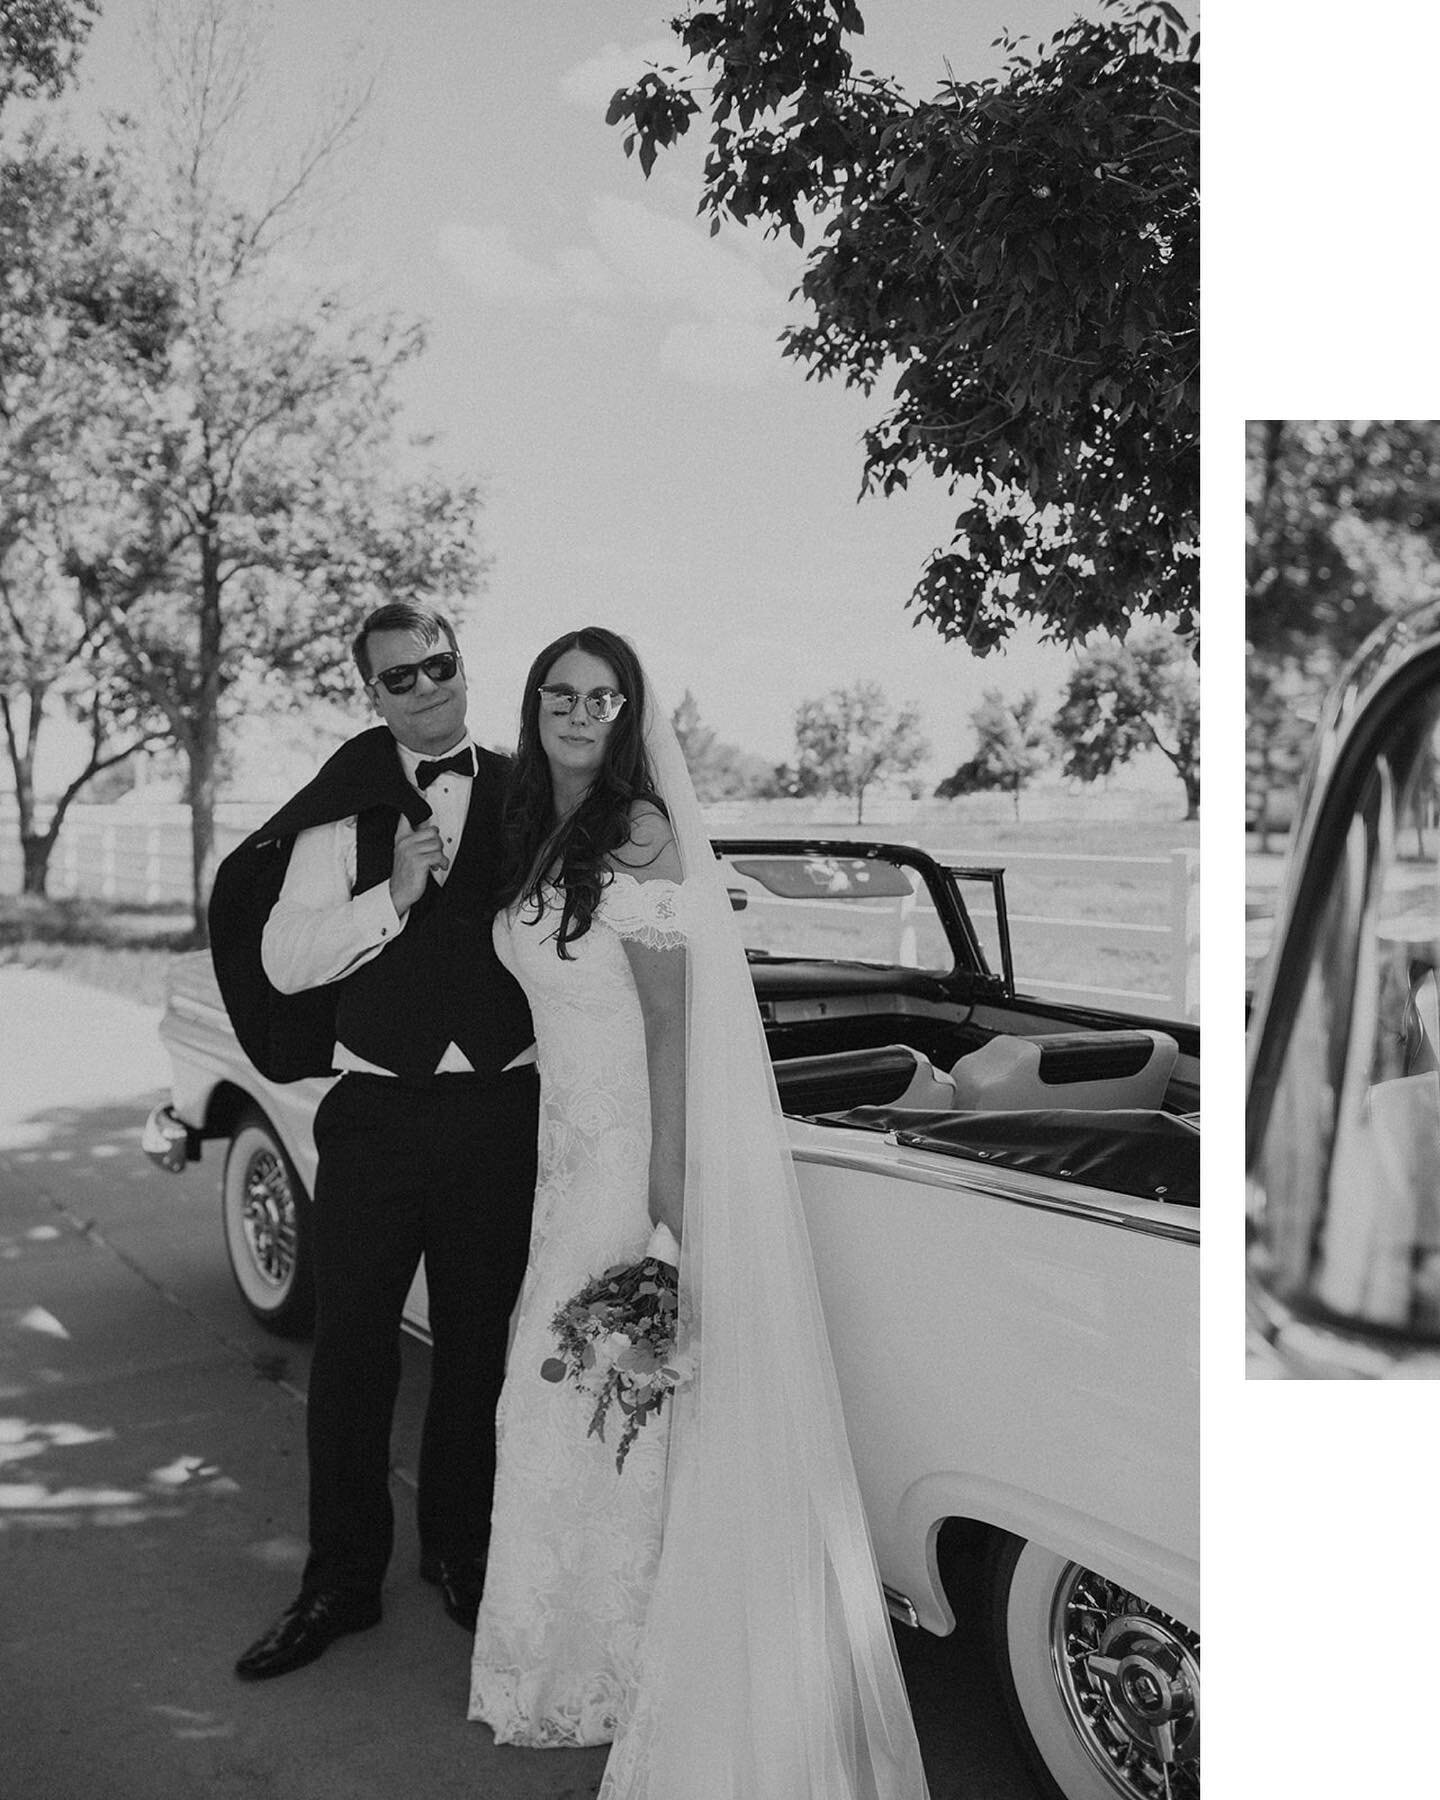 Vintage cars are such a fun addition to a wedding day! Had the best time with these two! 
.
.
.
.
.
#vintagecar #timelesswedding #italywedding #italyweddingphotographer #destinationwedding #coloradoweddingstyle #coloradoelopmentphotographer #intimate